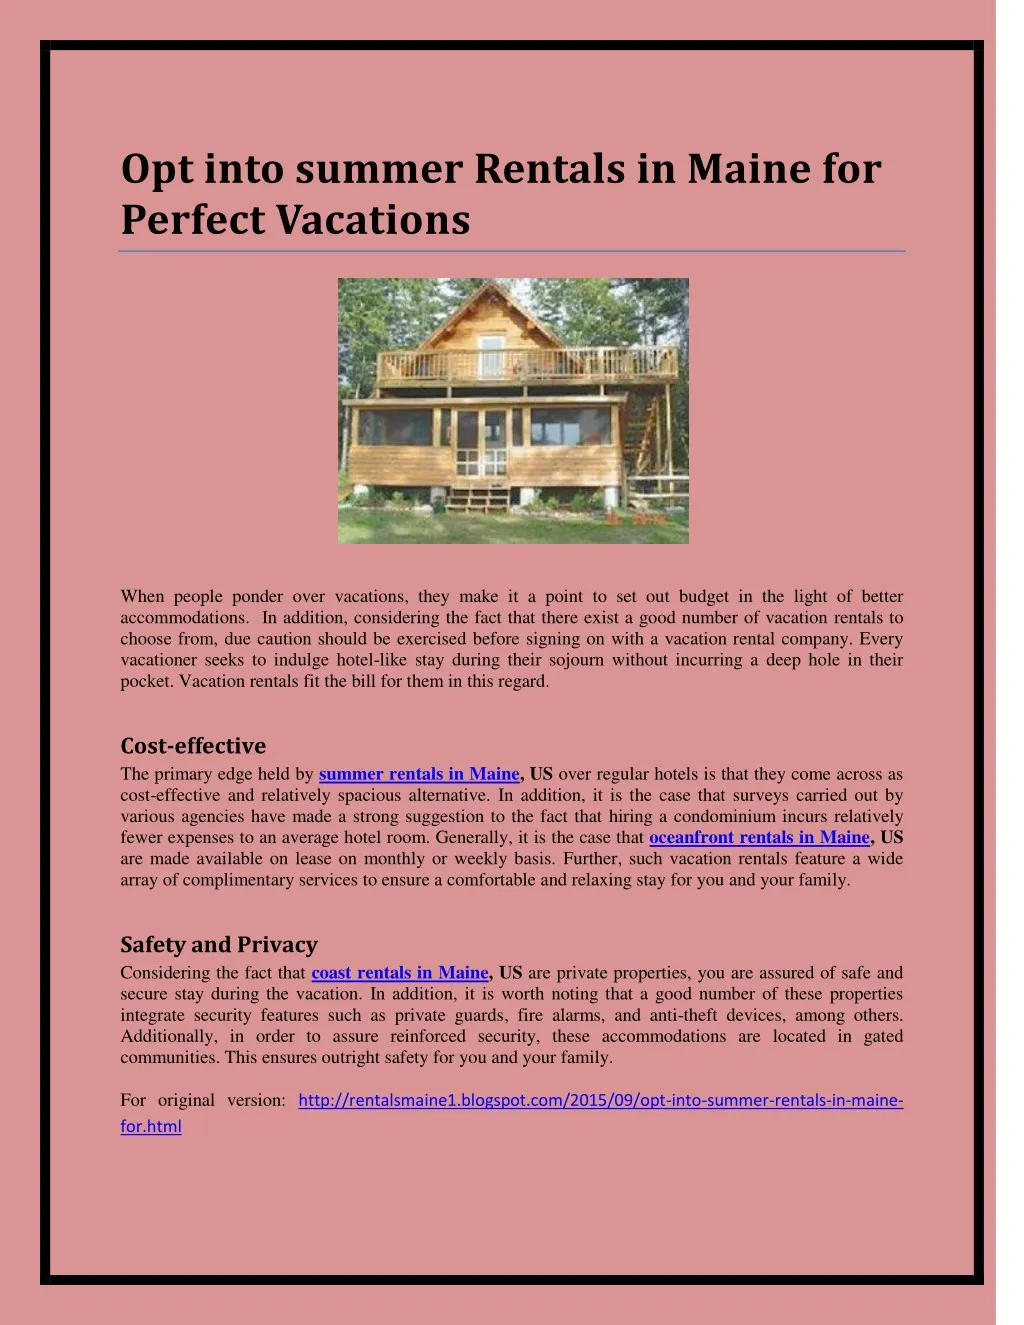 opt into summer rentals in maine for perfect